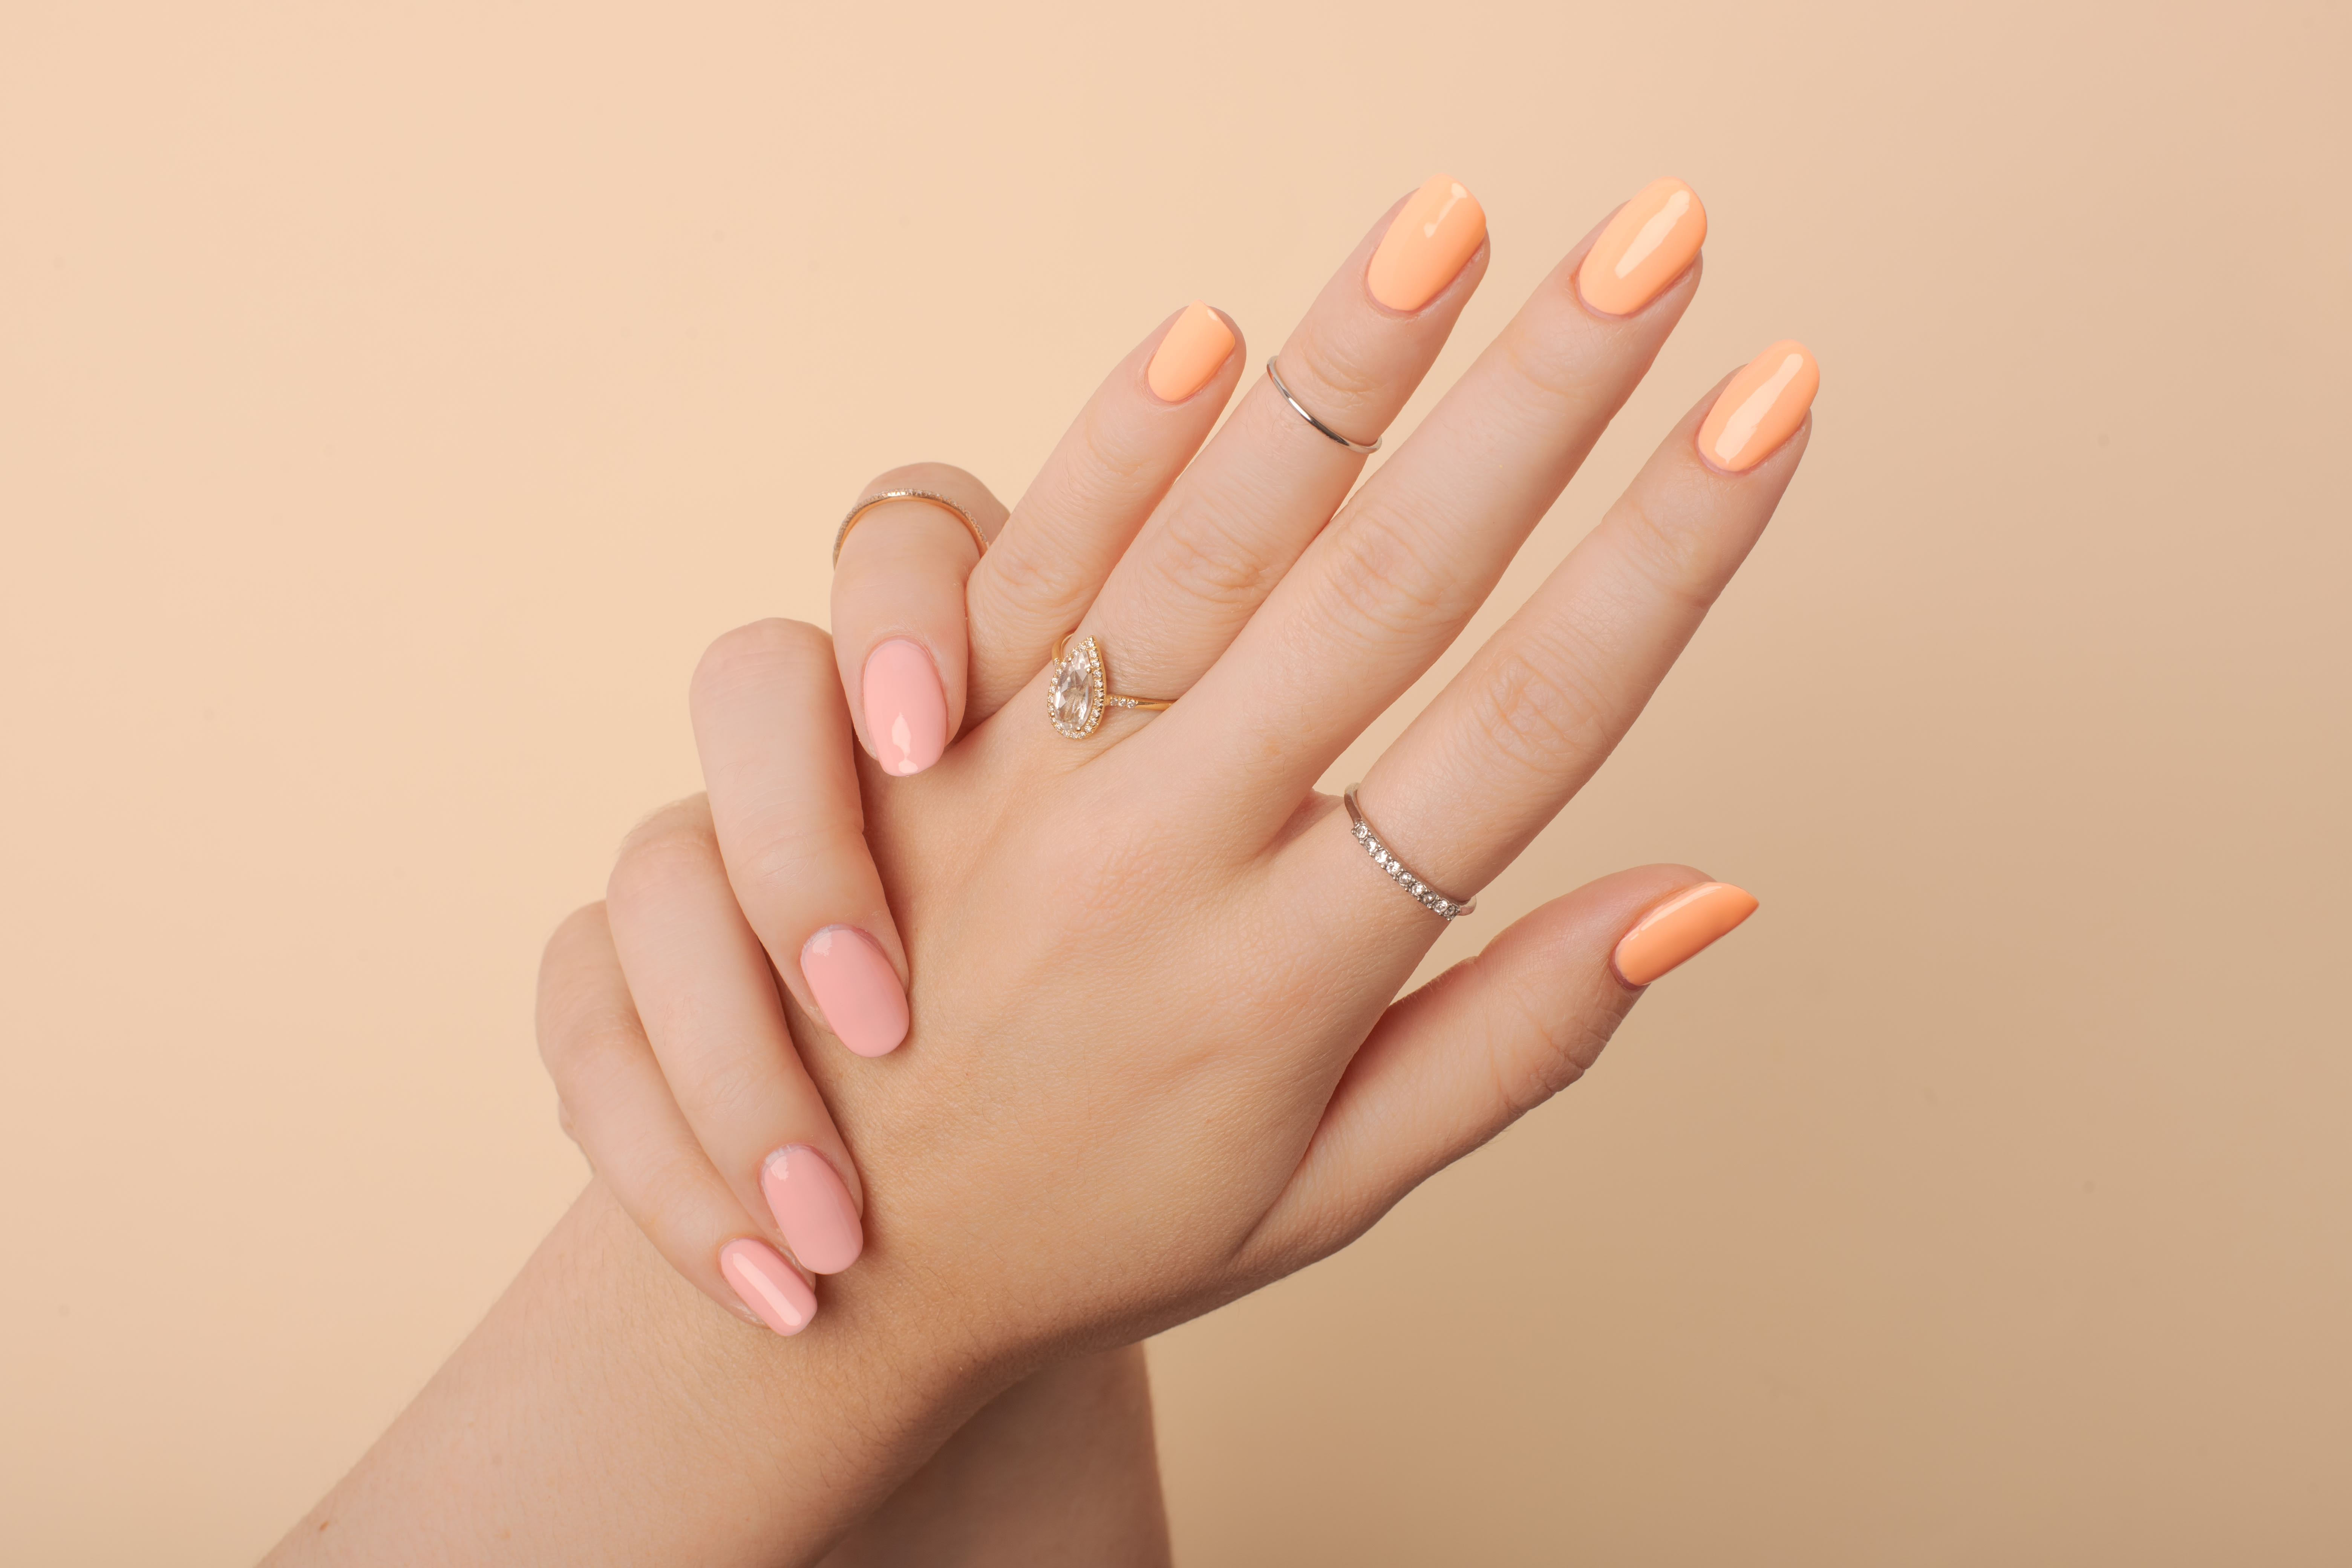 1. Ombre nails - wide 10